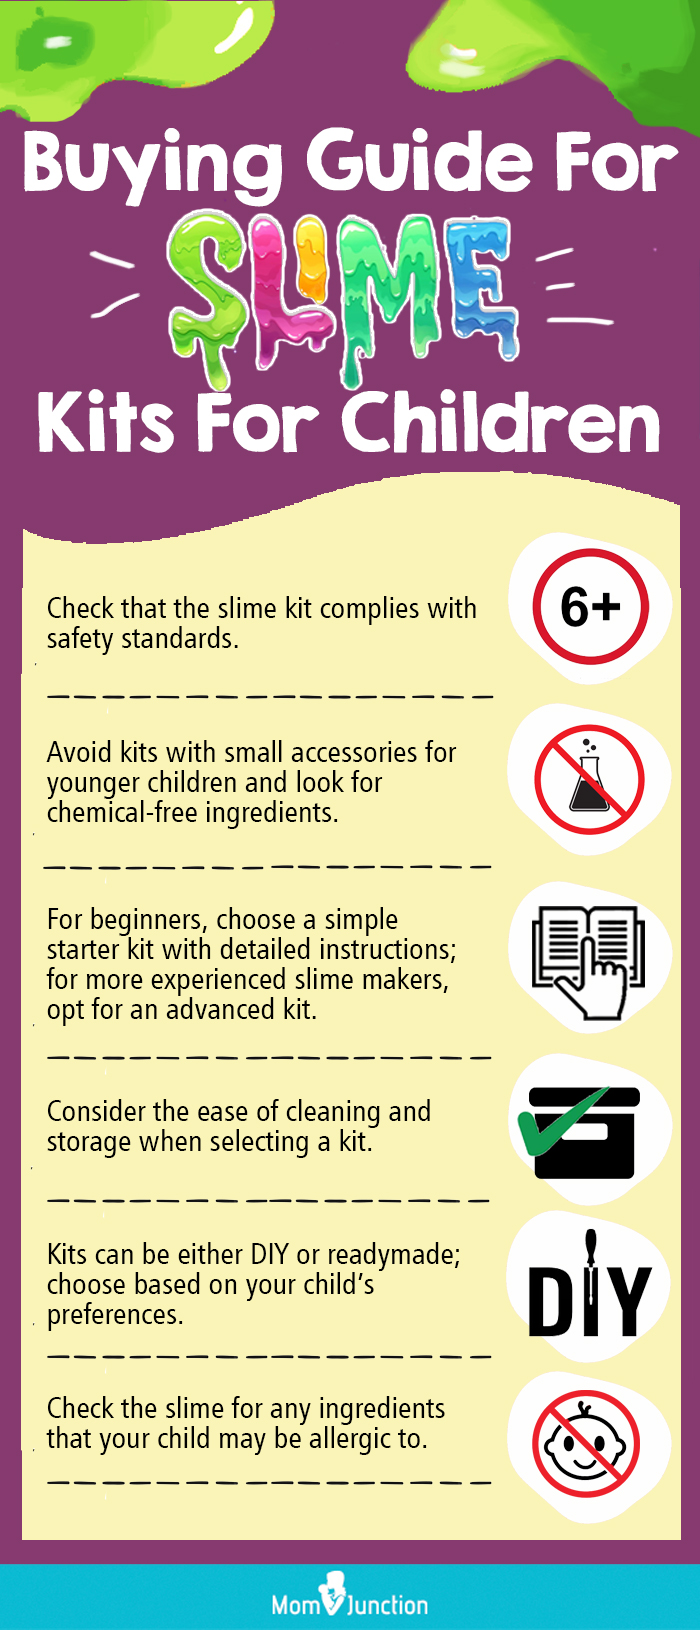 Buying Guide For Slime Kits For Children (infographic)